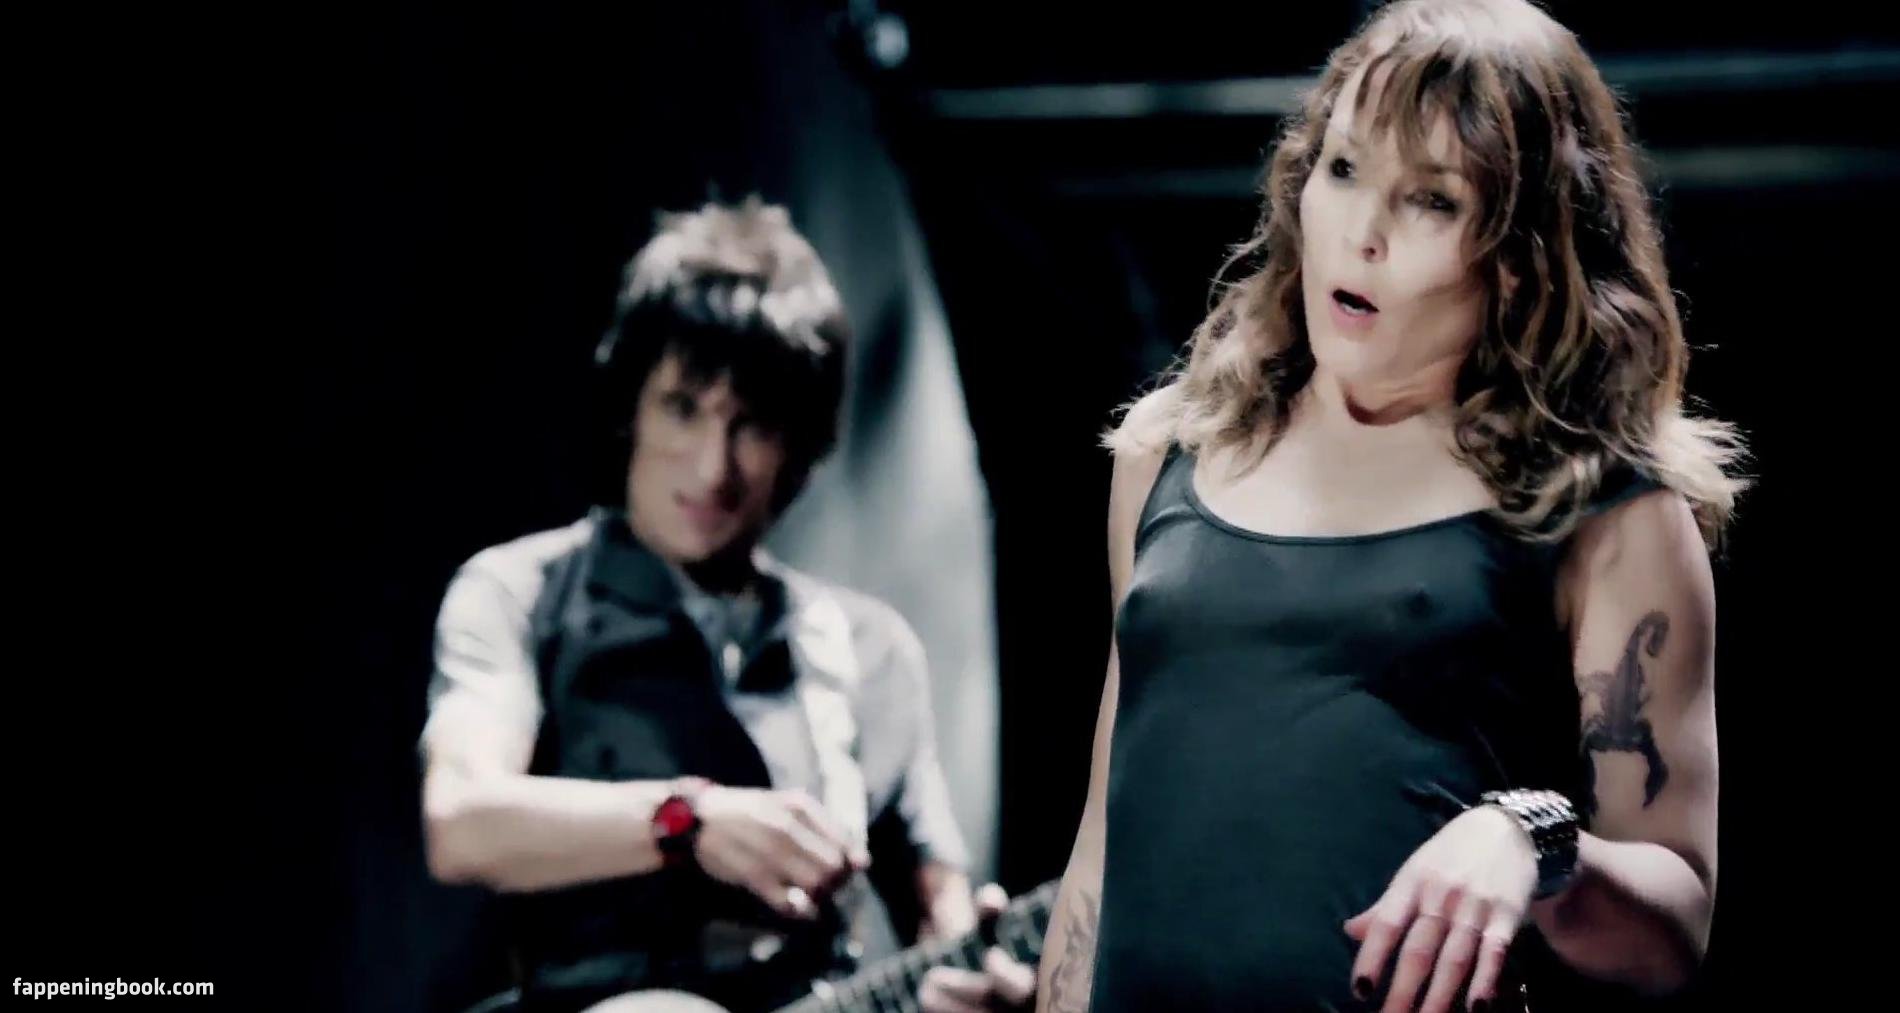 Fappening noomi rapace 41 Sexiest